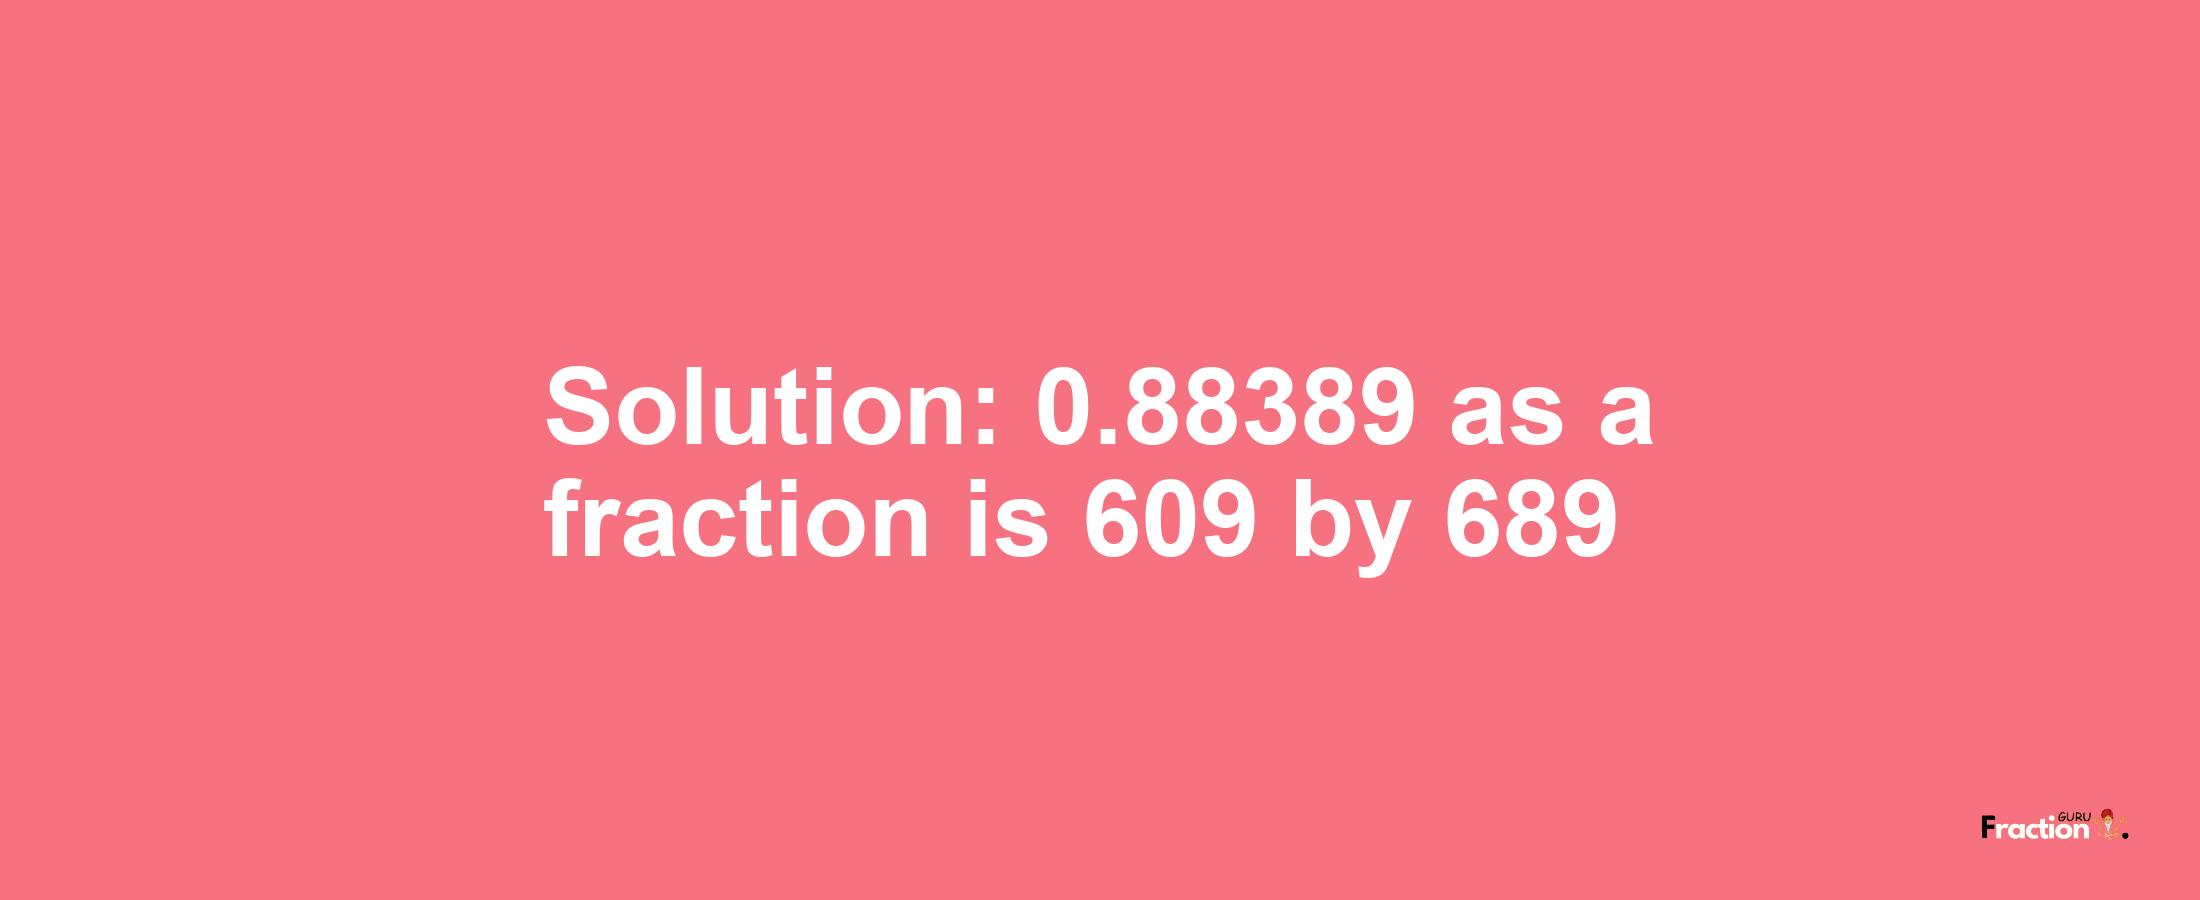 Solution:0.88389 as a fraction is 609/689